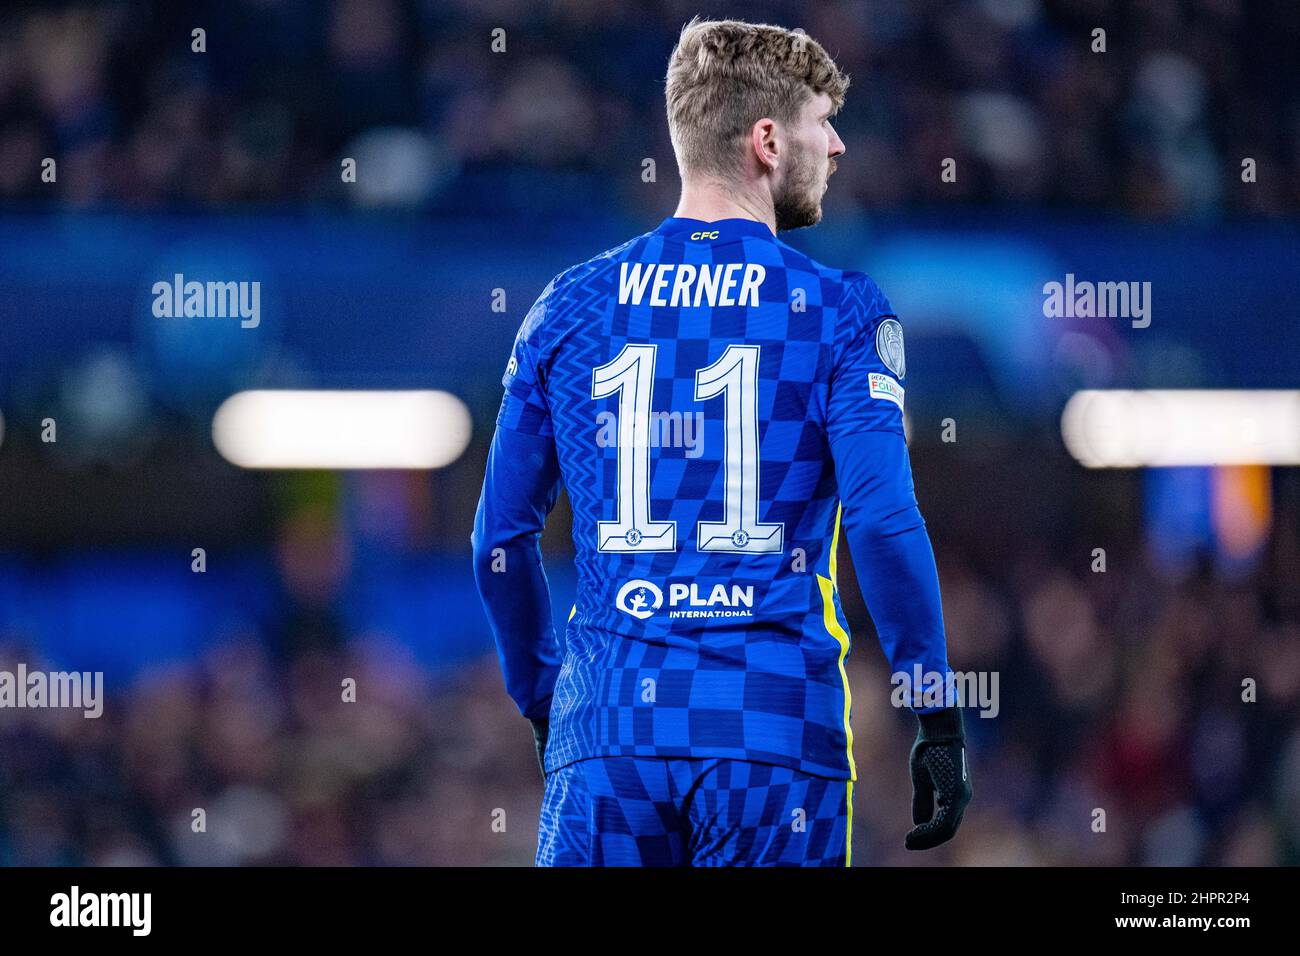 LONDON, ENGLAND - FEBRUARY 22: Timo Werner of Chelsea FC during the UEFA Champions League Round Of Sixteen Leg One match between Chelsea FC and Lille Stock Photo